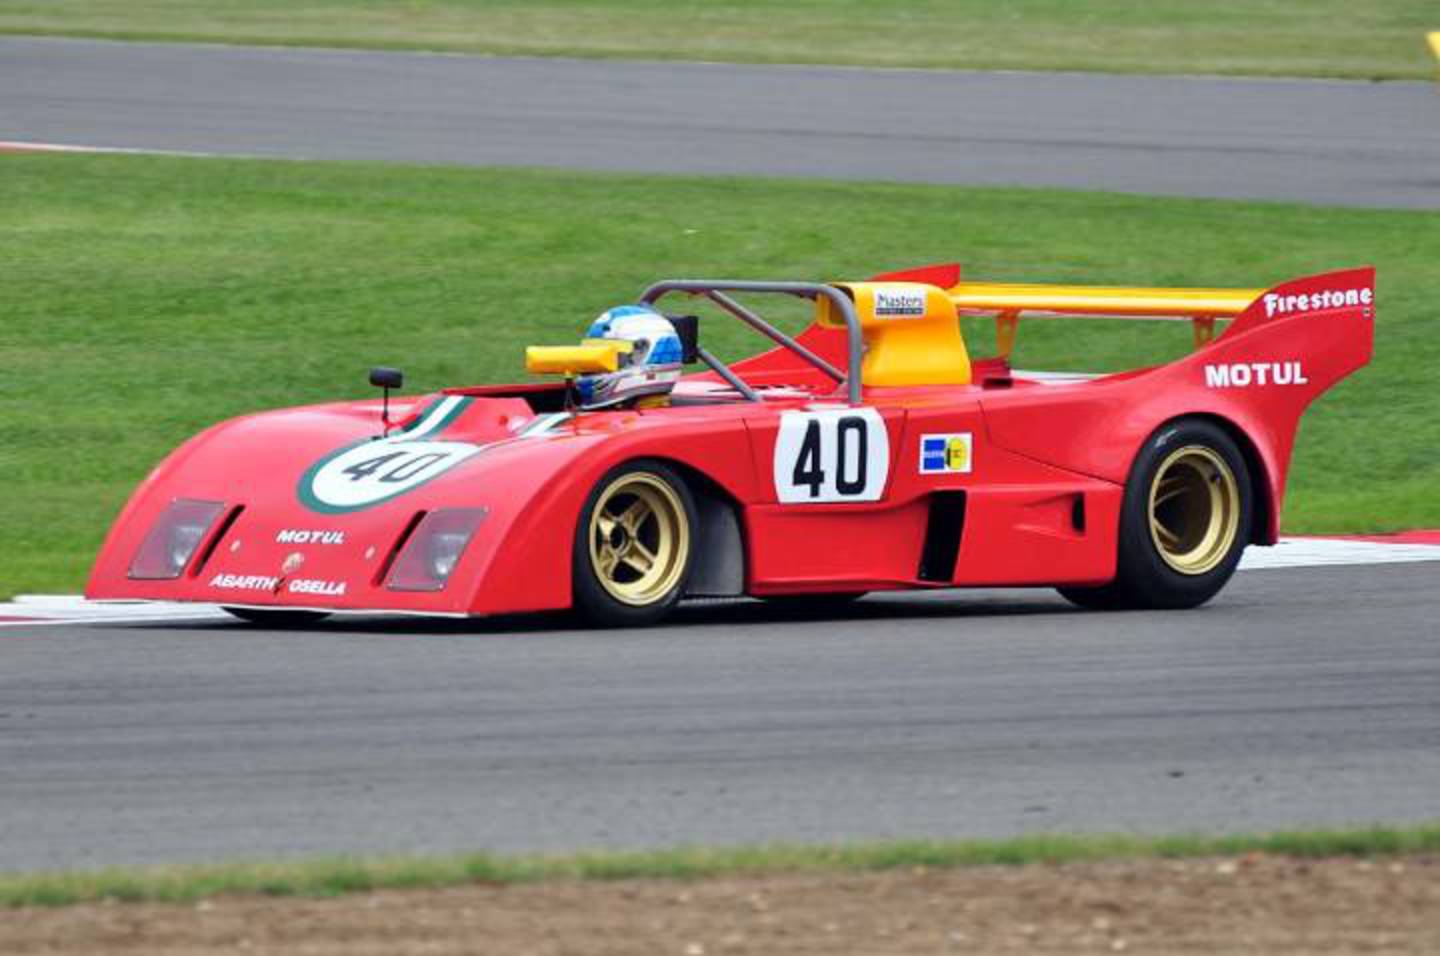 Abarth Osella PA 1 Photo Gallery: Photo #06 out of 8, Image Size ...